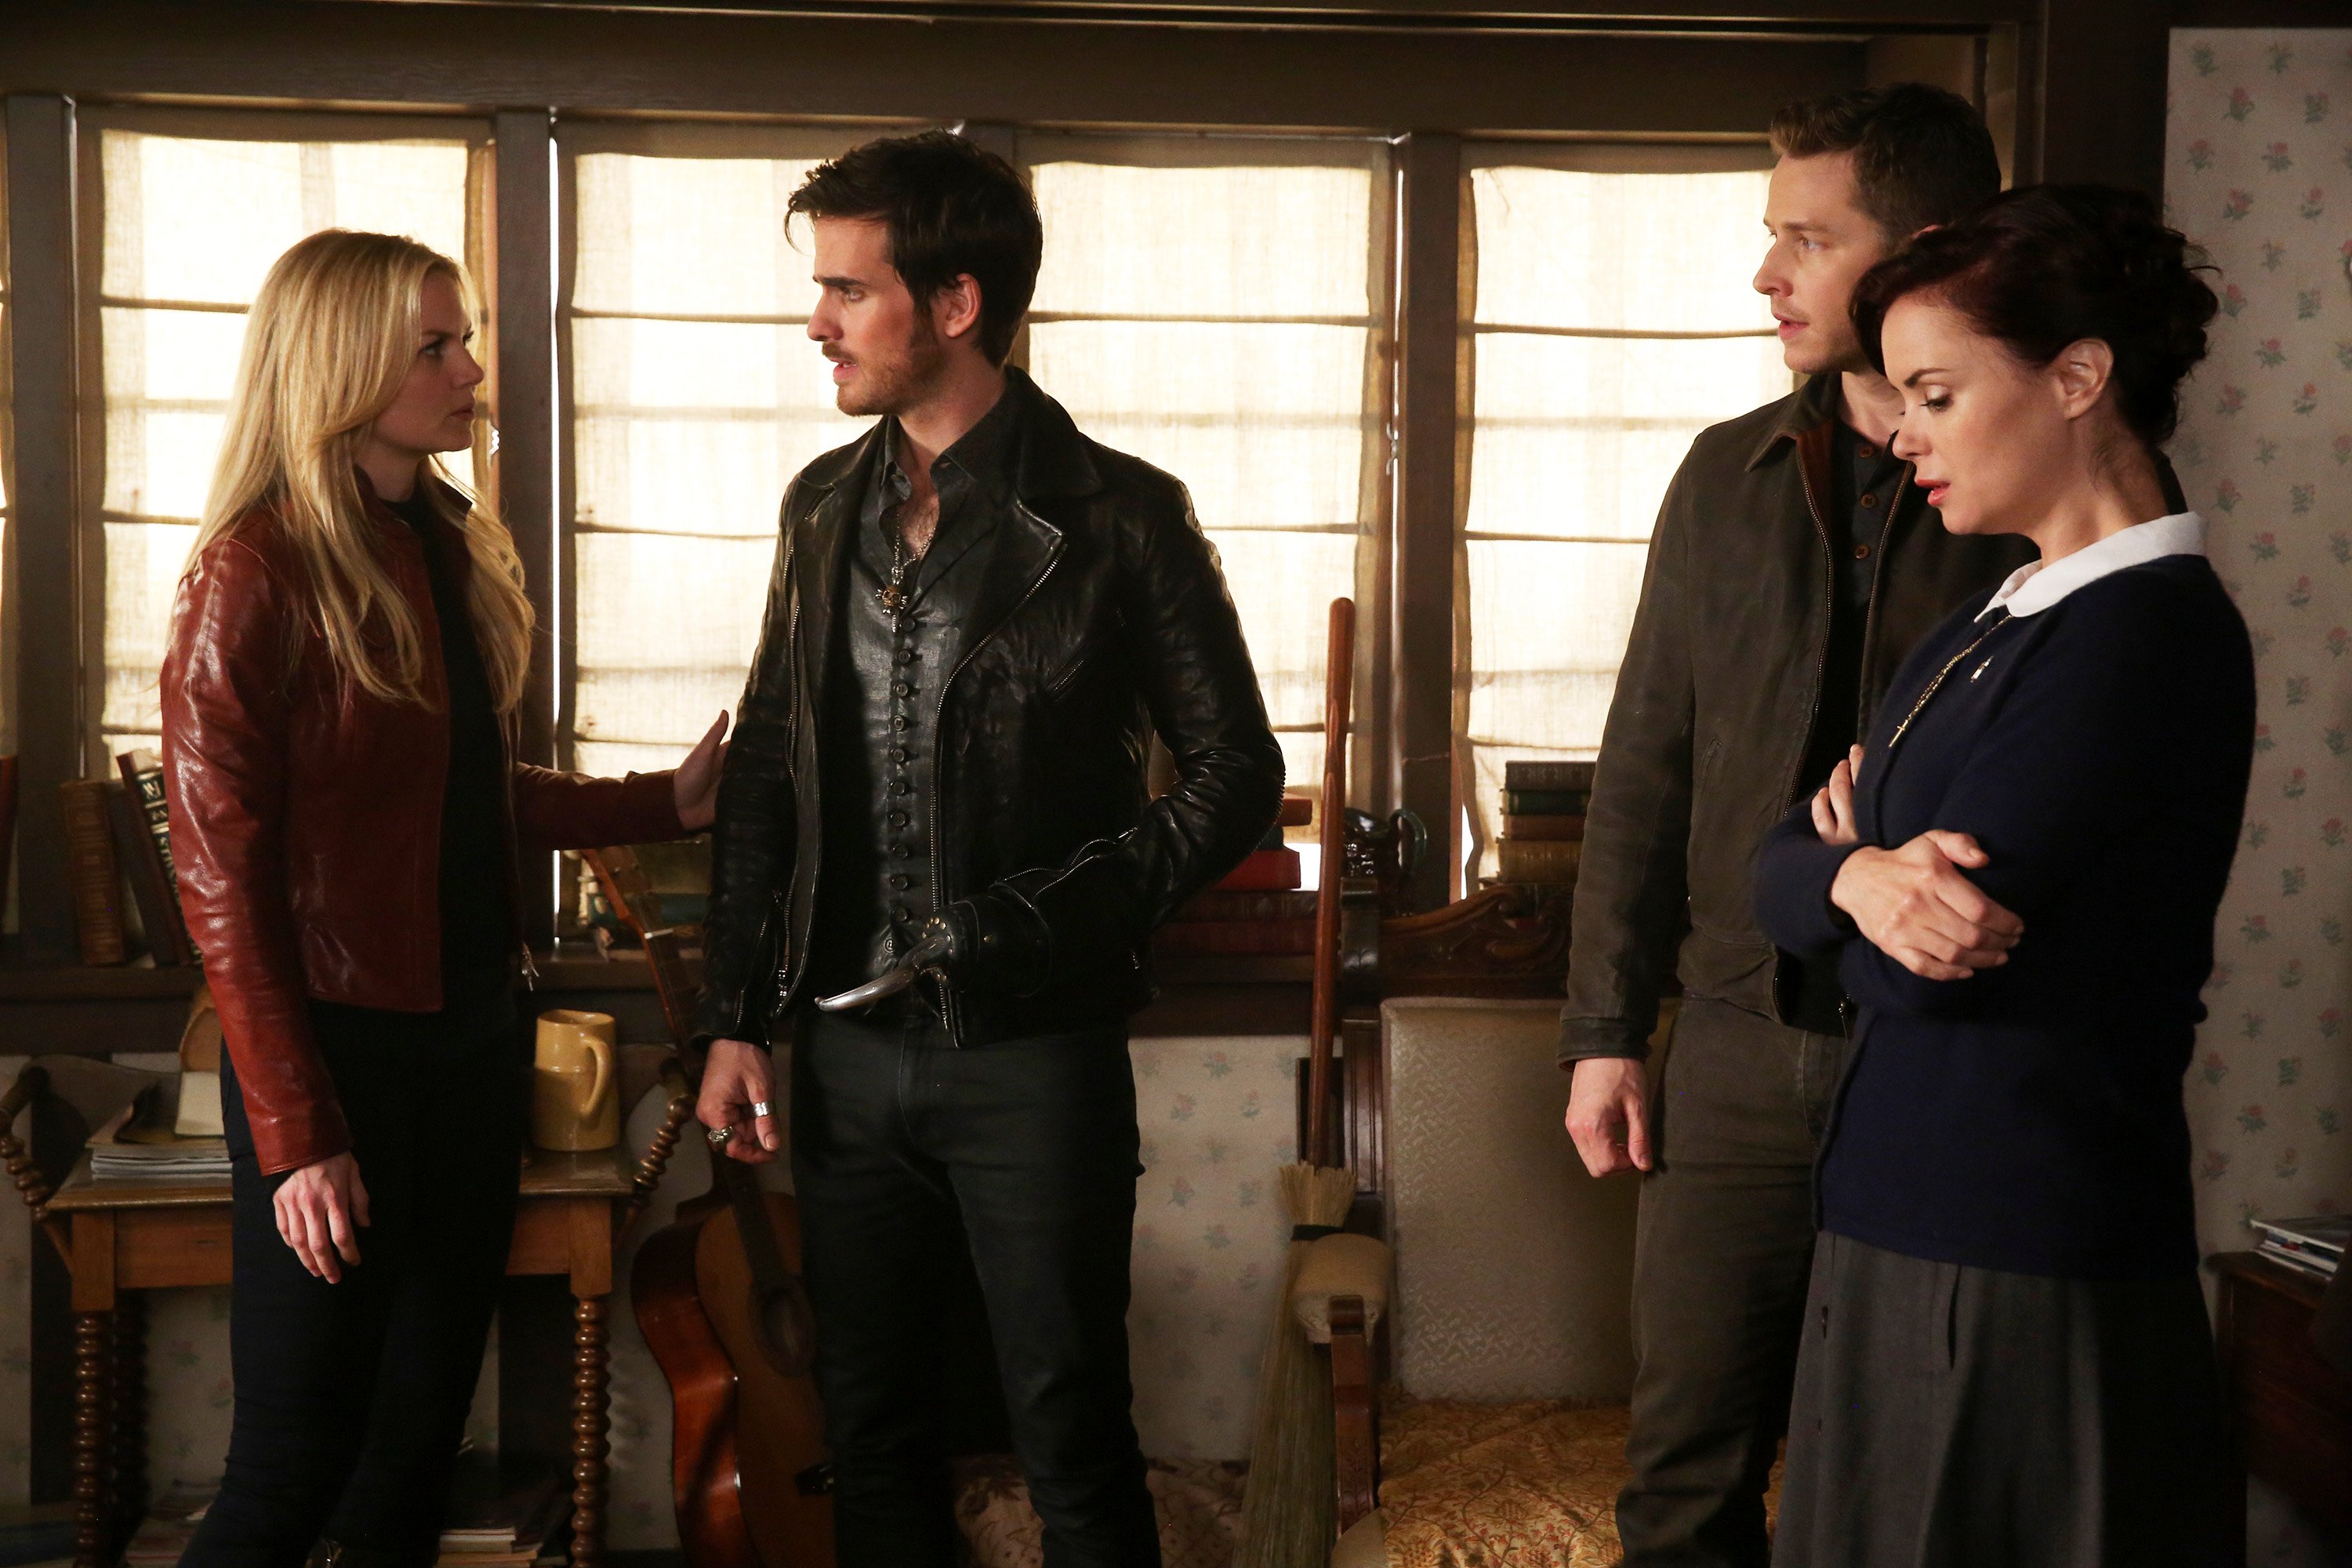 'Once Upon a Time' Episode Titled 'Operation Mongoose, Part 1 and Part 2'